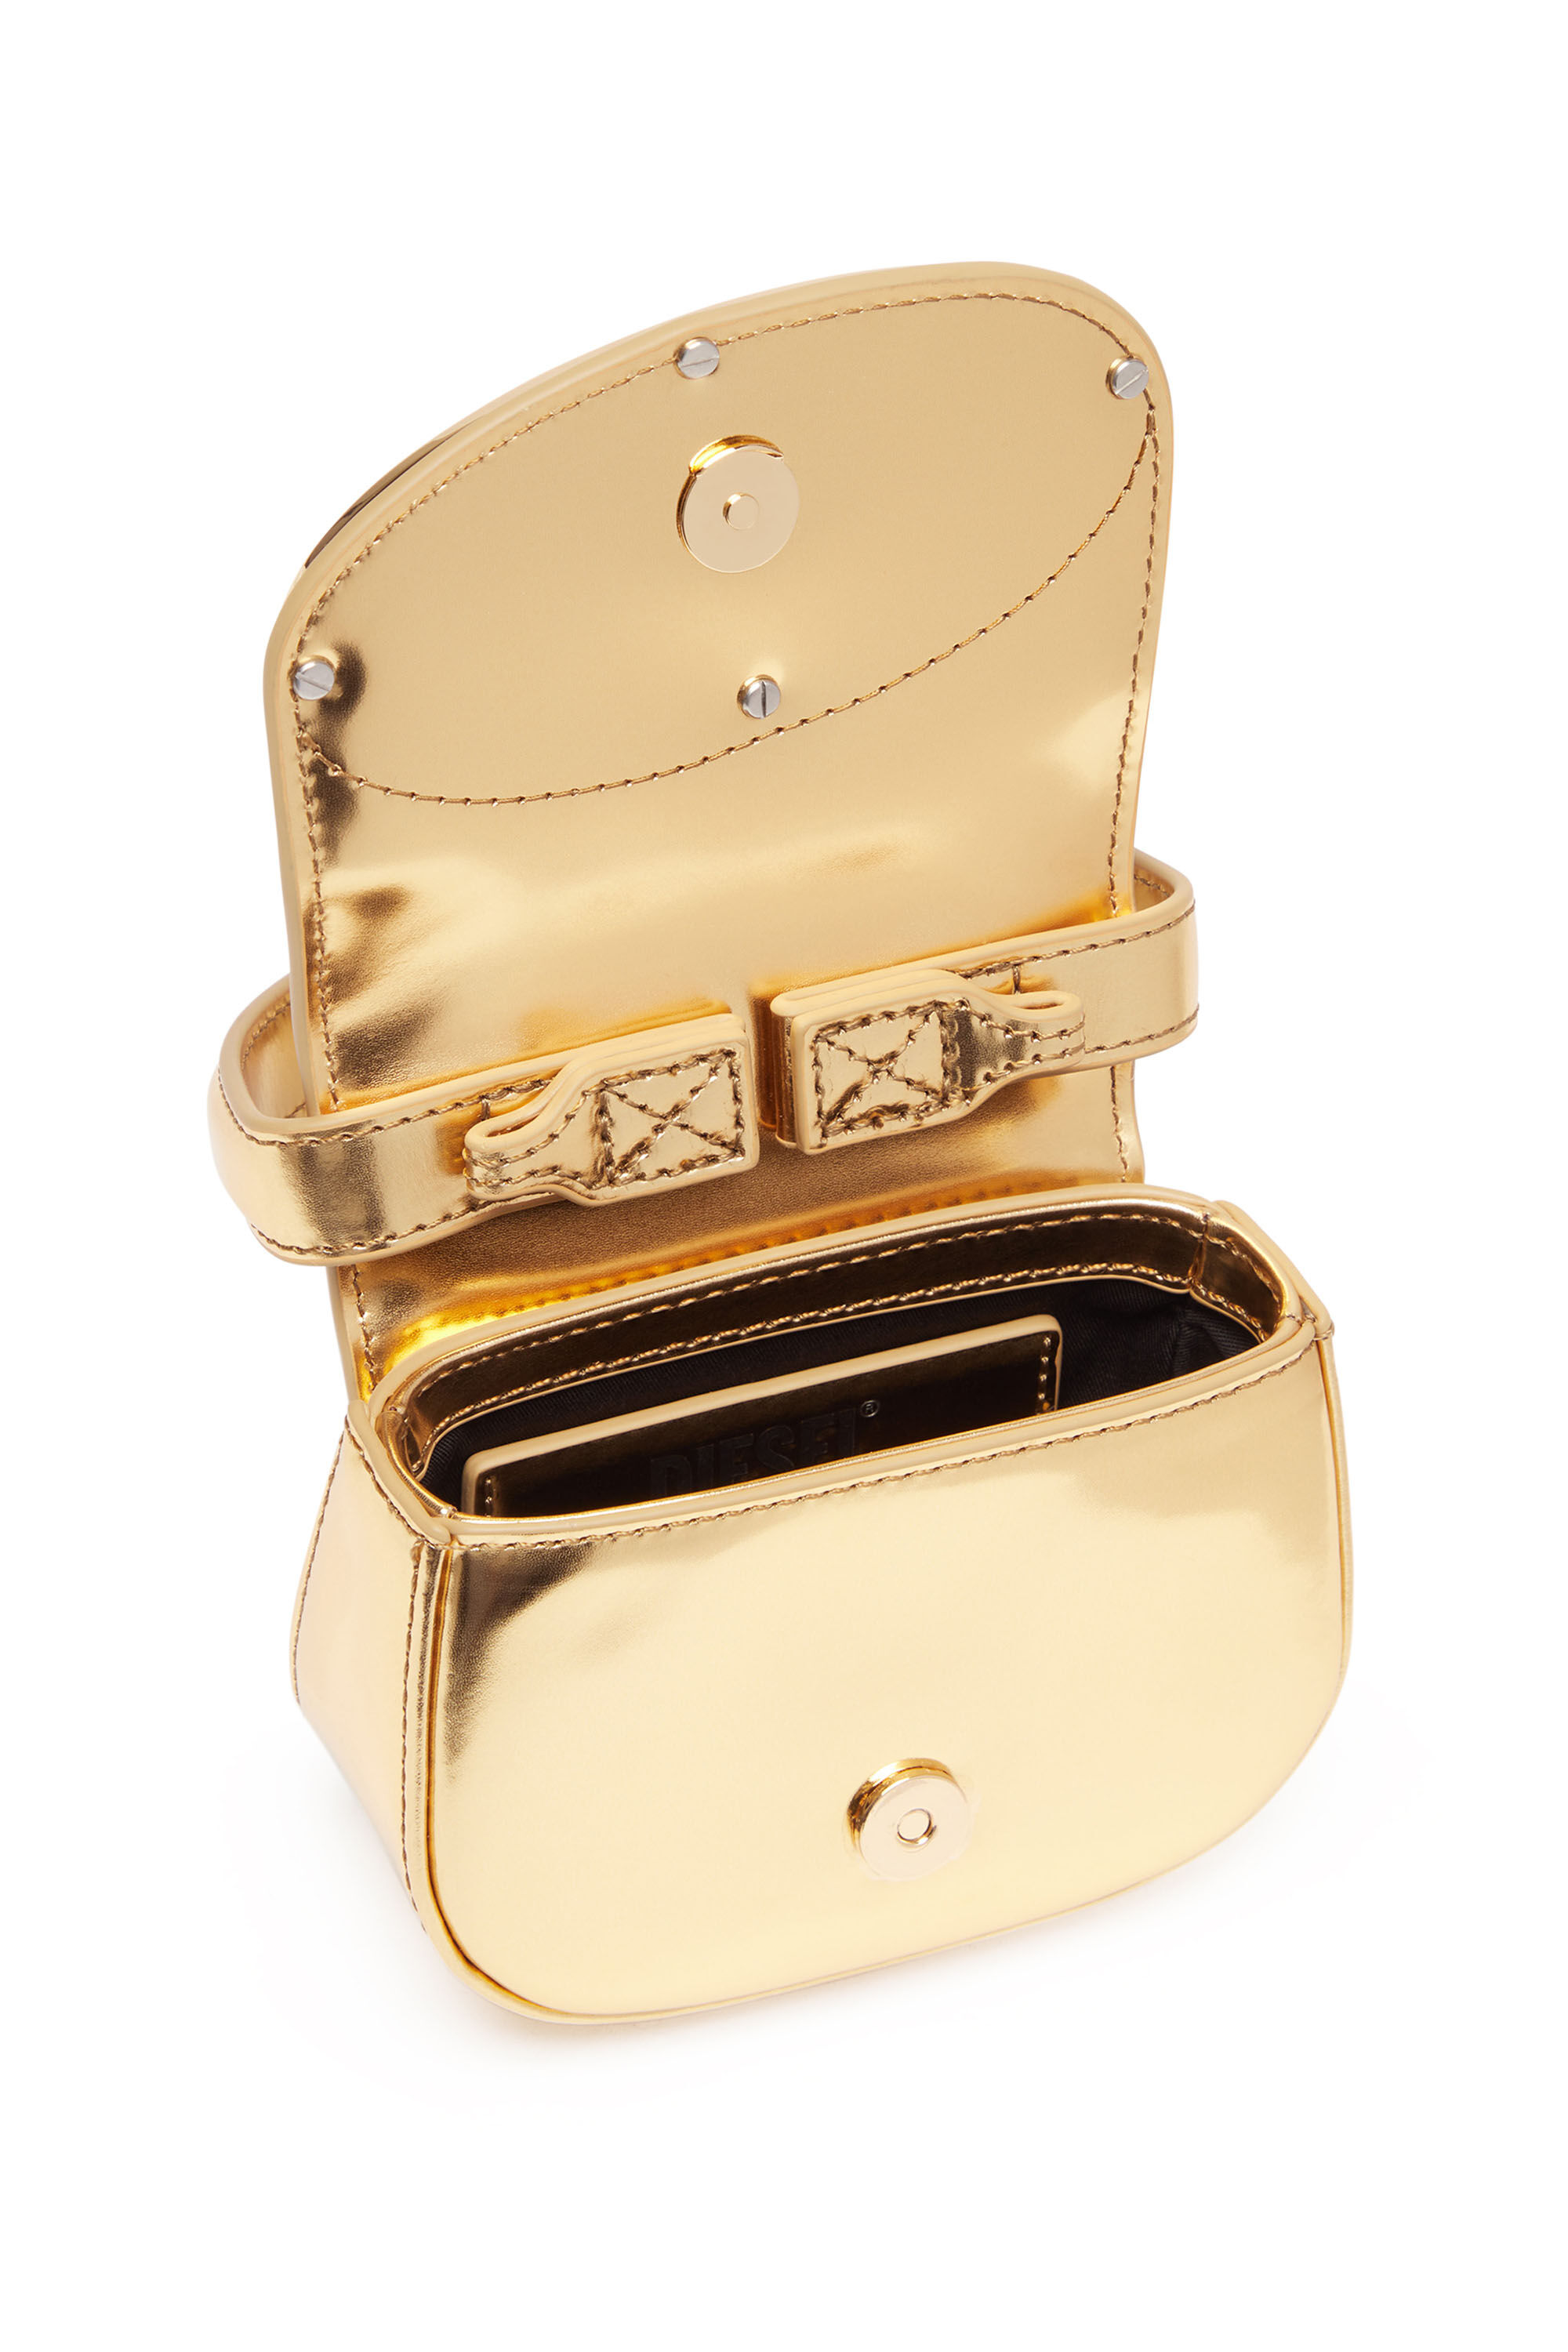 Diesel - 1DR-XS-S, Woman 1DR-XS-S-Iconic mini bag in mirrored leather in Oro - Image 5